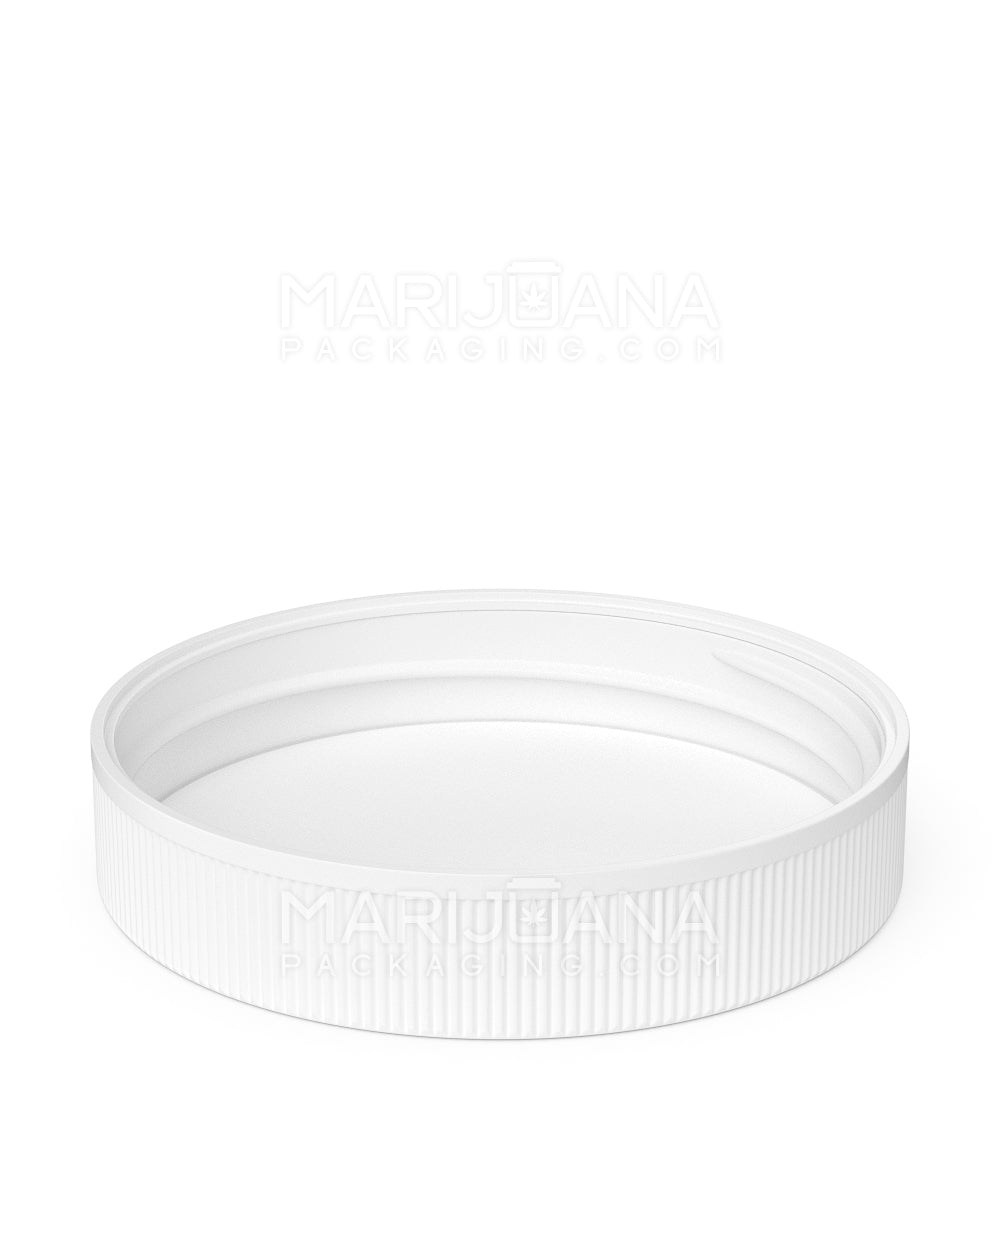 Child Resistant | Ribbed Push Down & Turn Plastic Caps w/ Foam Liner | 89mm - Semi Gloss White - 205 Count - 4